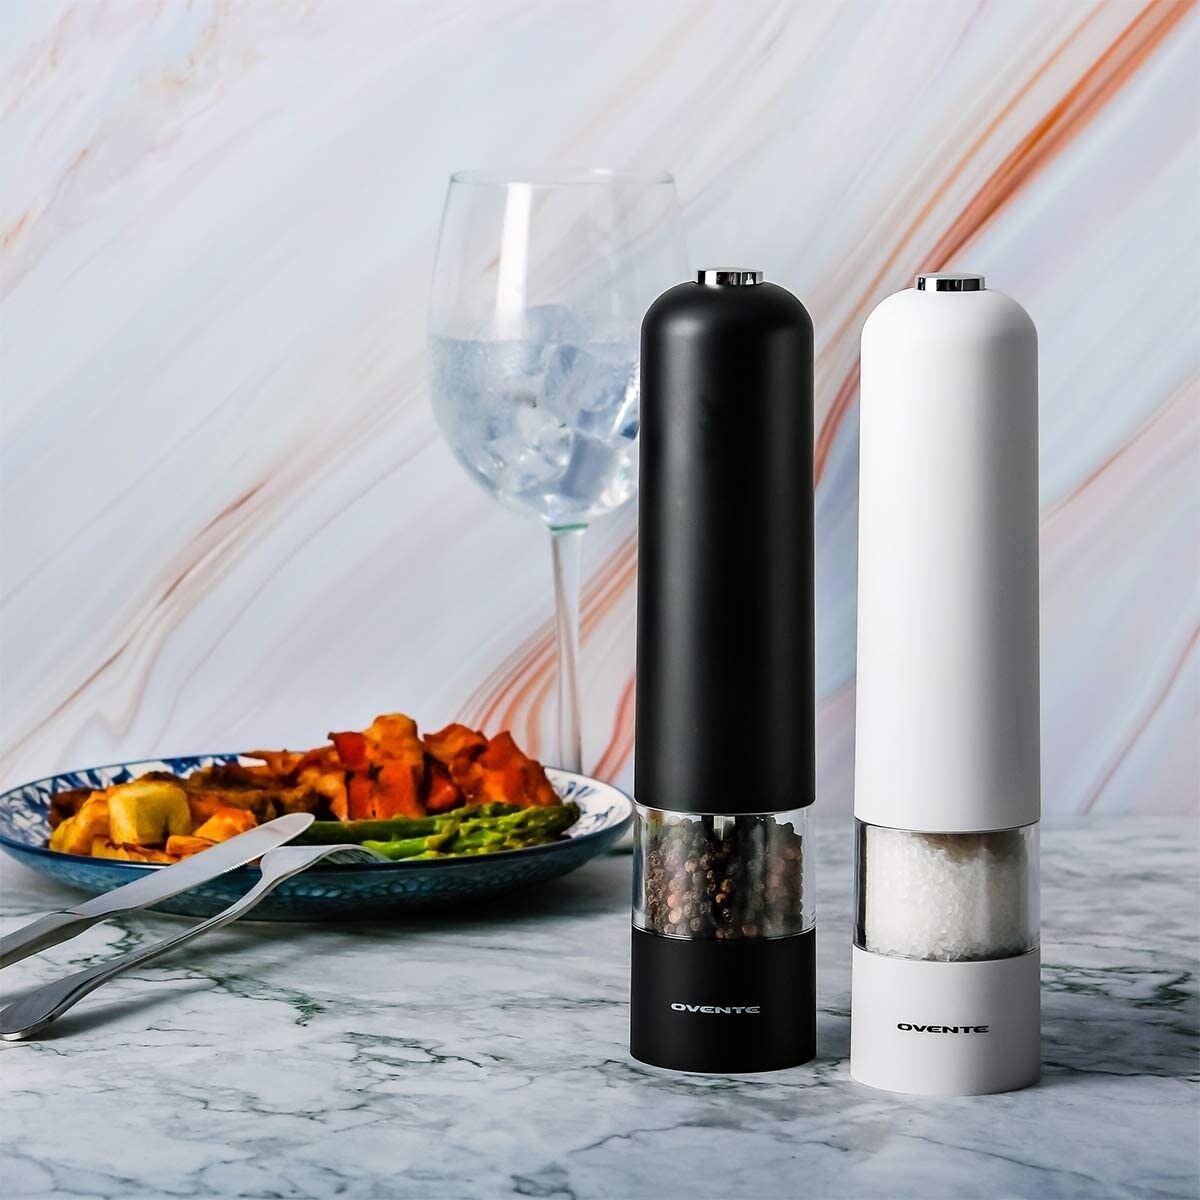 https://ak1.ostkcdn.com/images/products/is/images/direct/997ae351edd48cbeed6e8fc60141c5d5473d078c/Ovente-Electric-Sea-Salt-%26-Pepper-Grinder-Set%2C-Pack-of-2-SPD102BW.jpg